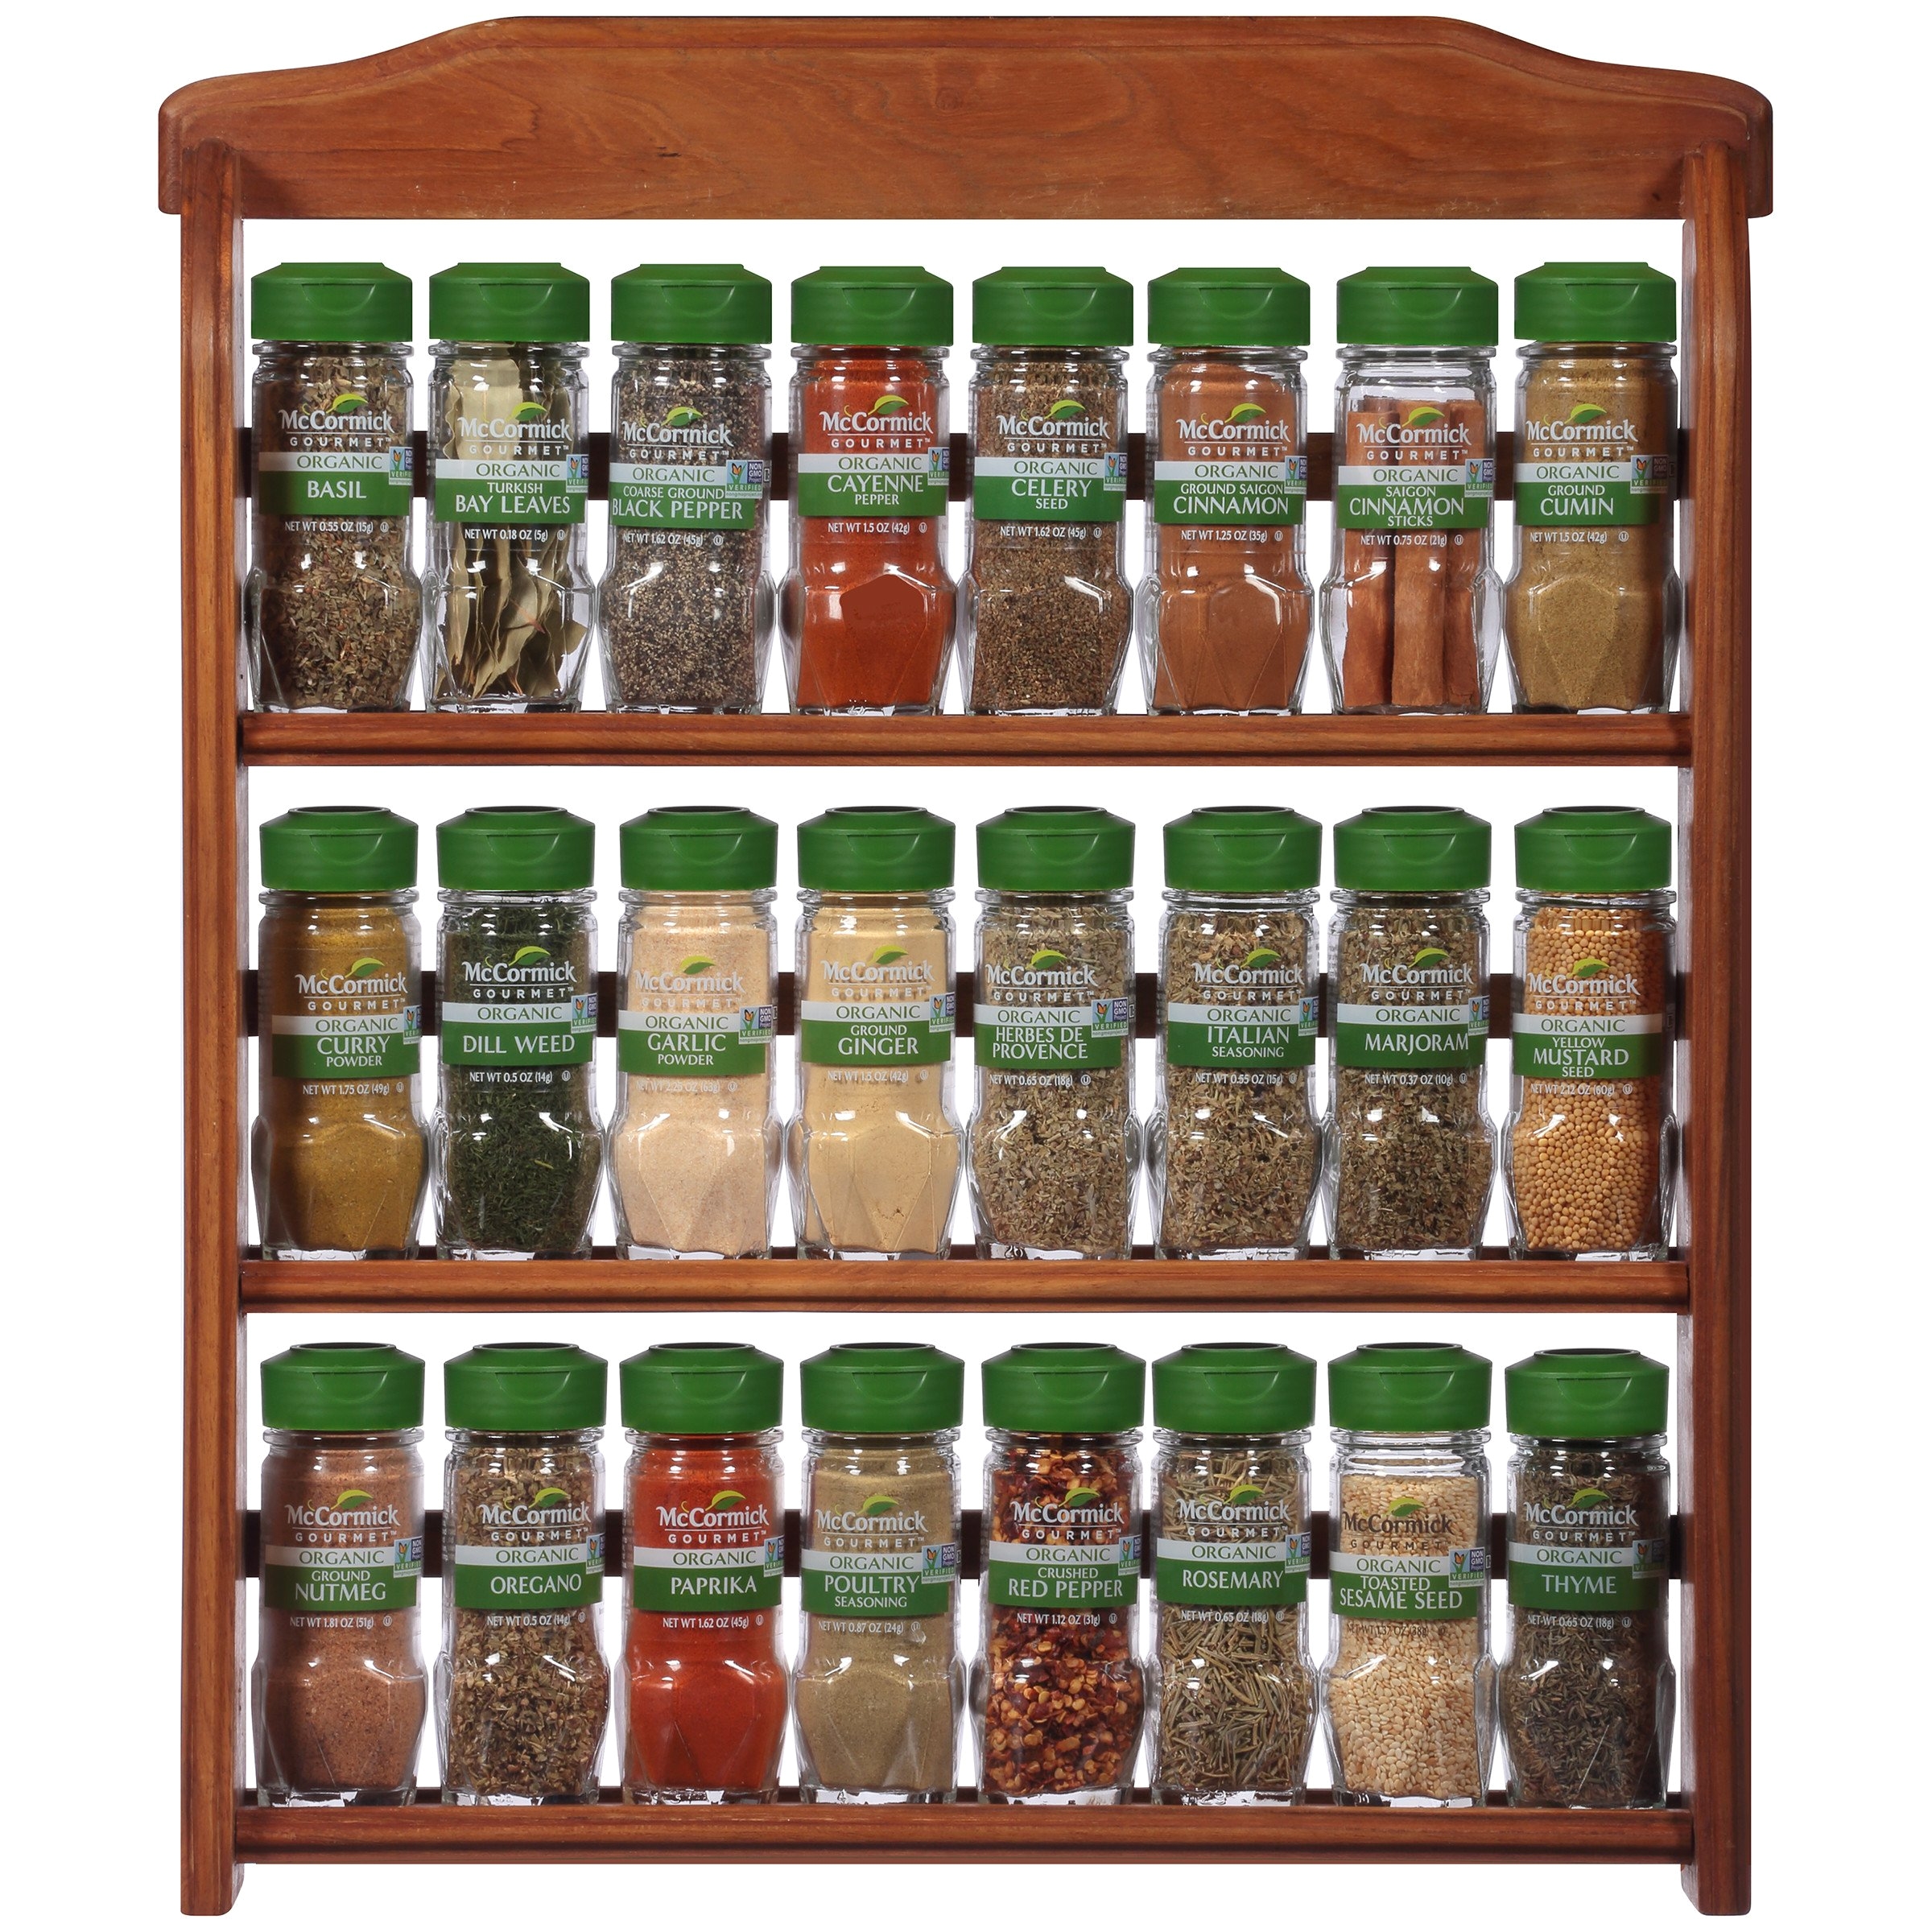 Best organic Spice Rack Amazon Com assorted Mccormick Baking Spices Variety Pack 6 Count